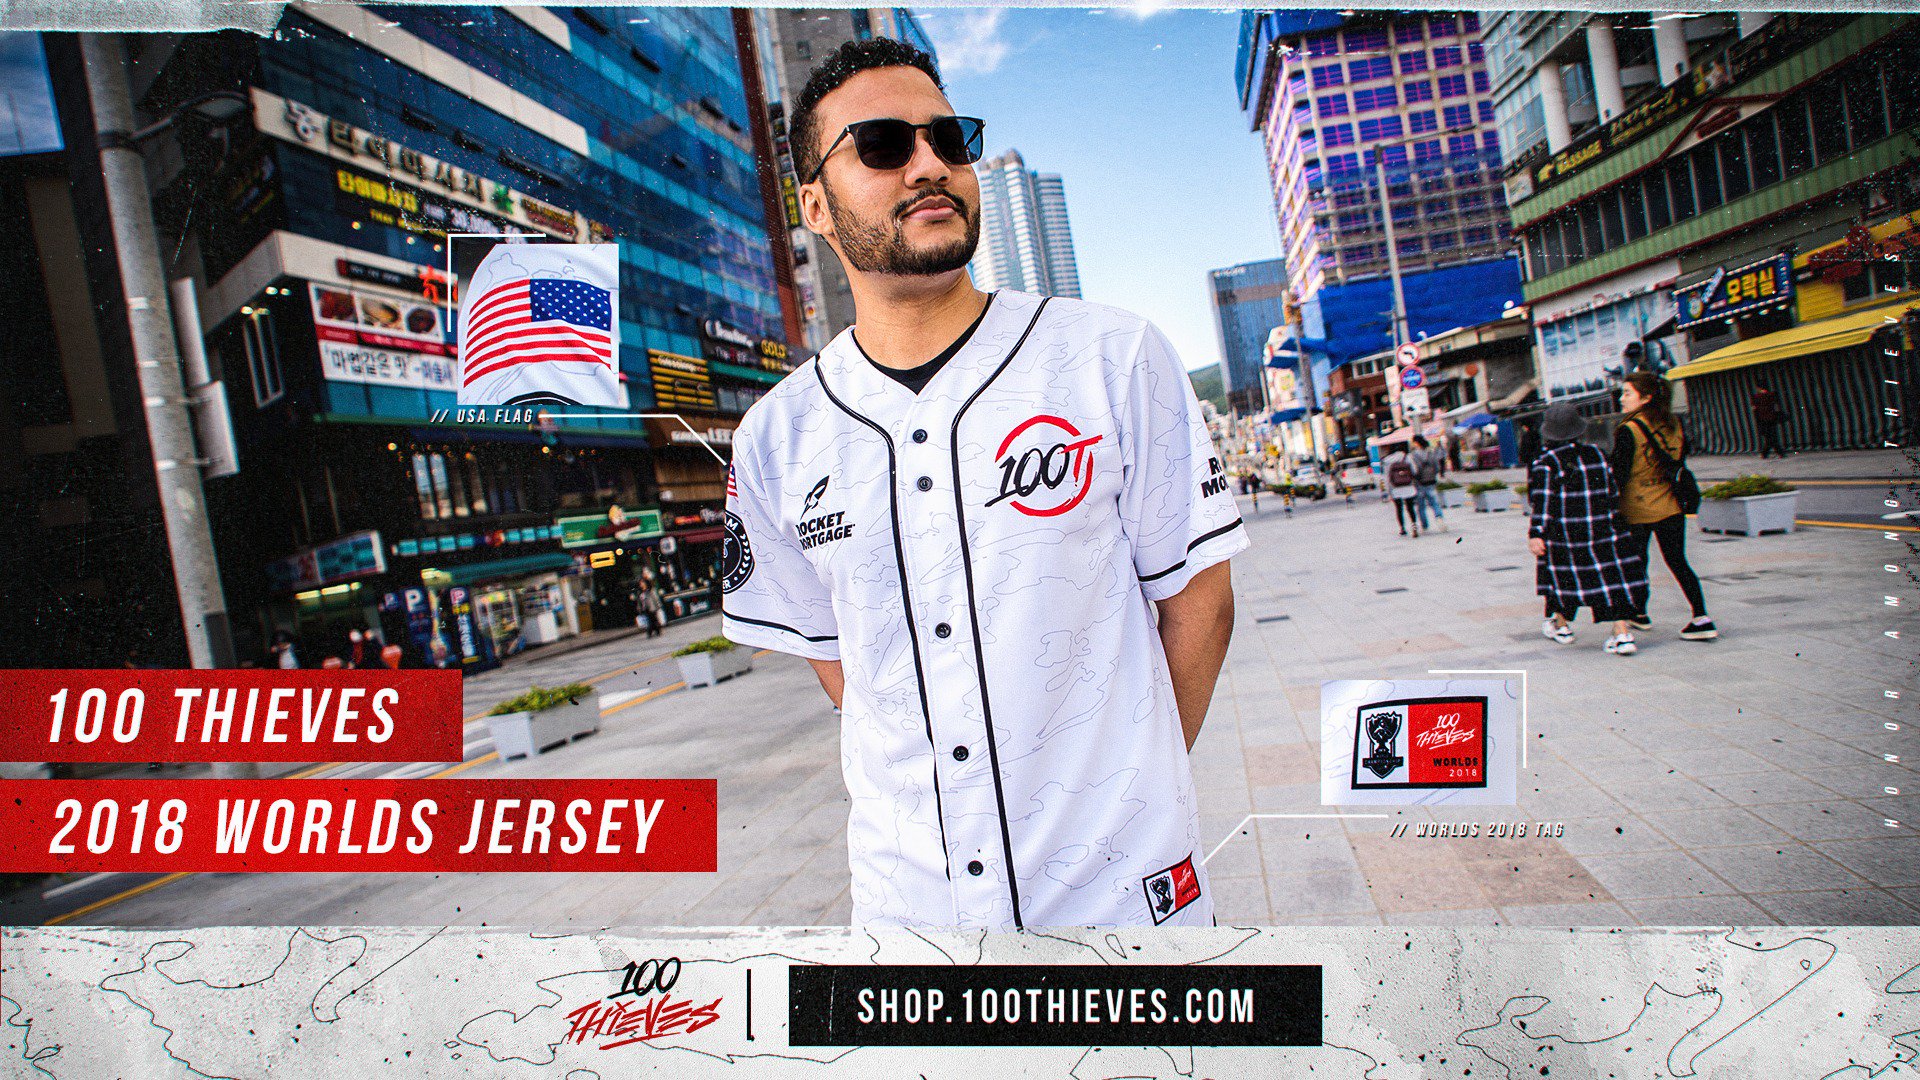 en "100 Thieves 2018 Worlds Jersey Available now. #Worlds2018 https://t.co/mX5Z04Uh7h https://t.co/BcVDZxbcTX" / Twitter